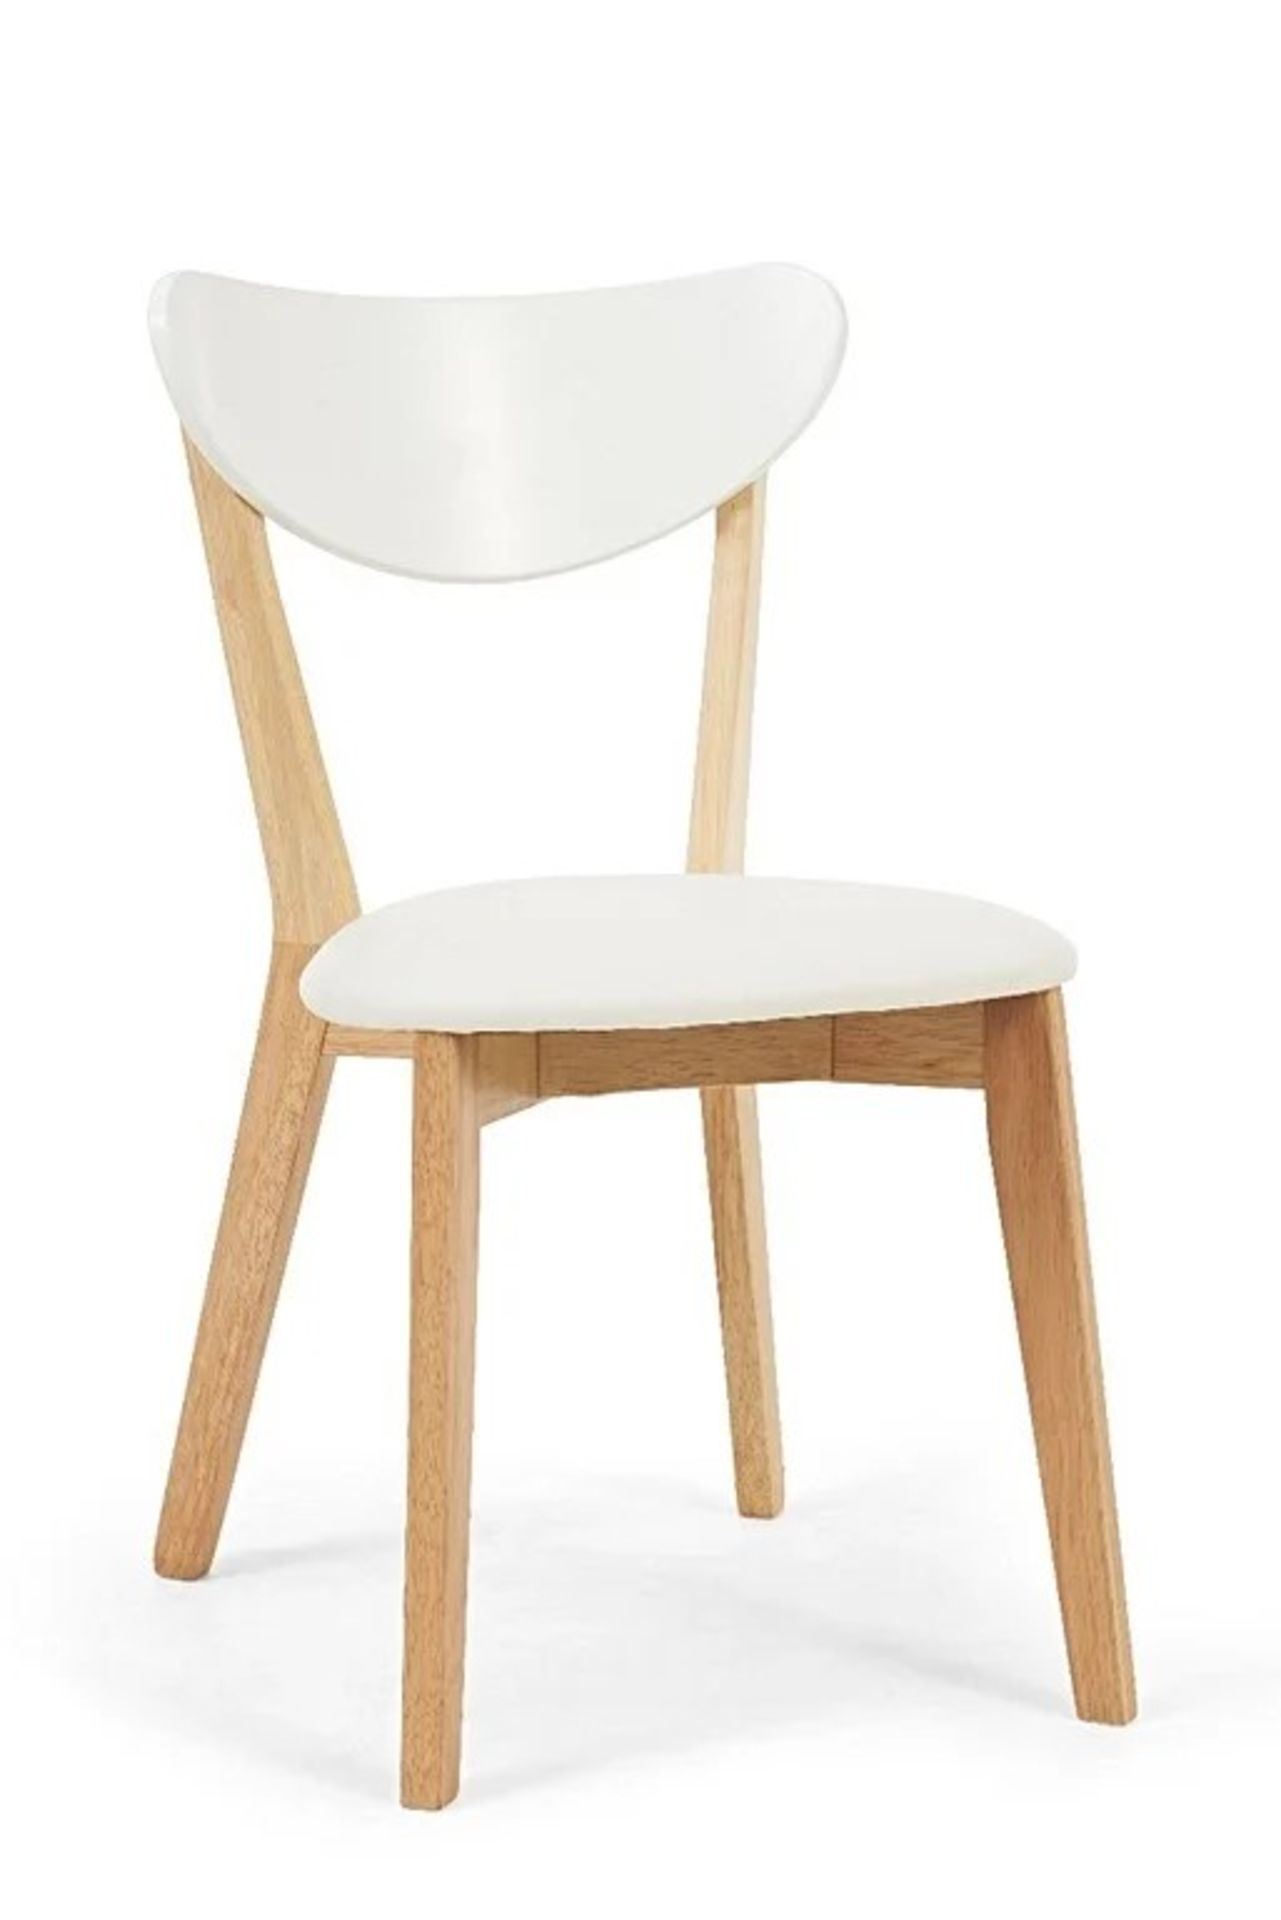 A set of 2 x Rebekah Oak and White Dining Chairs Retro-inspired with a gently curving back rest